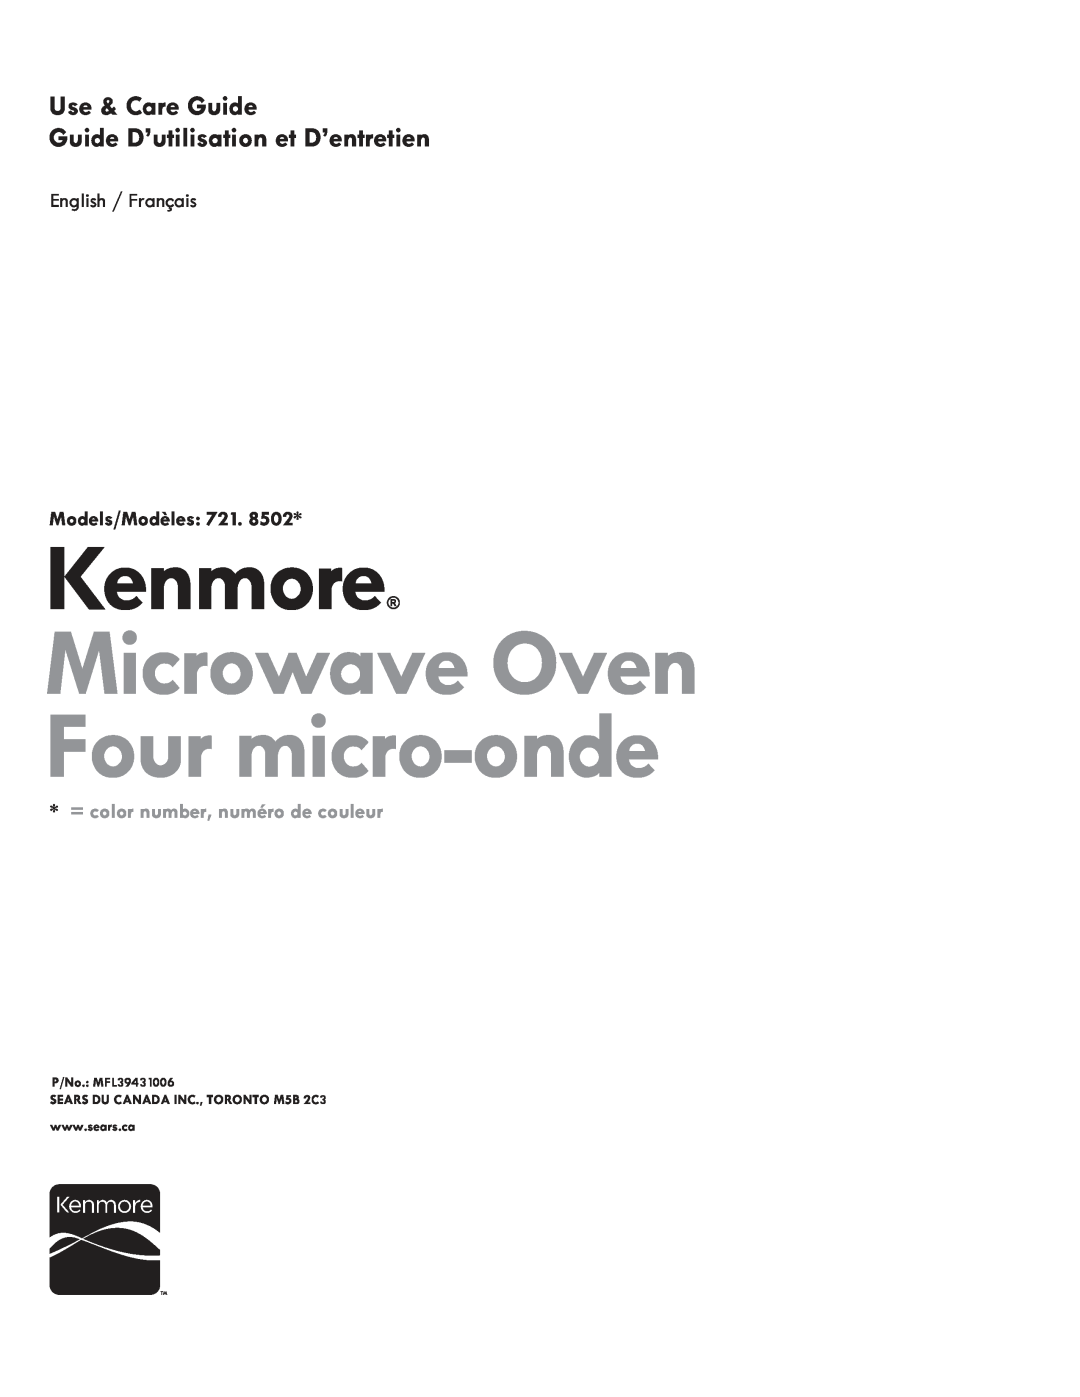 Kenmore 721.8502 manual Kenmore Microwave Oven Four micro-onde, Use & Care Guide Guide D’utilisation et D’entretien 